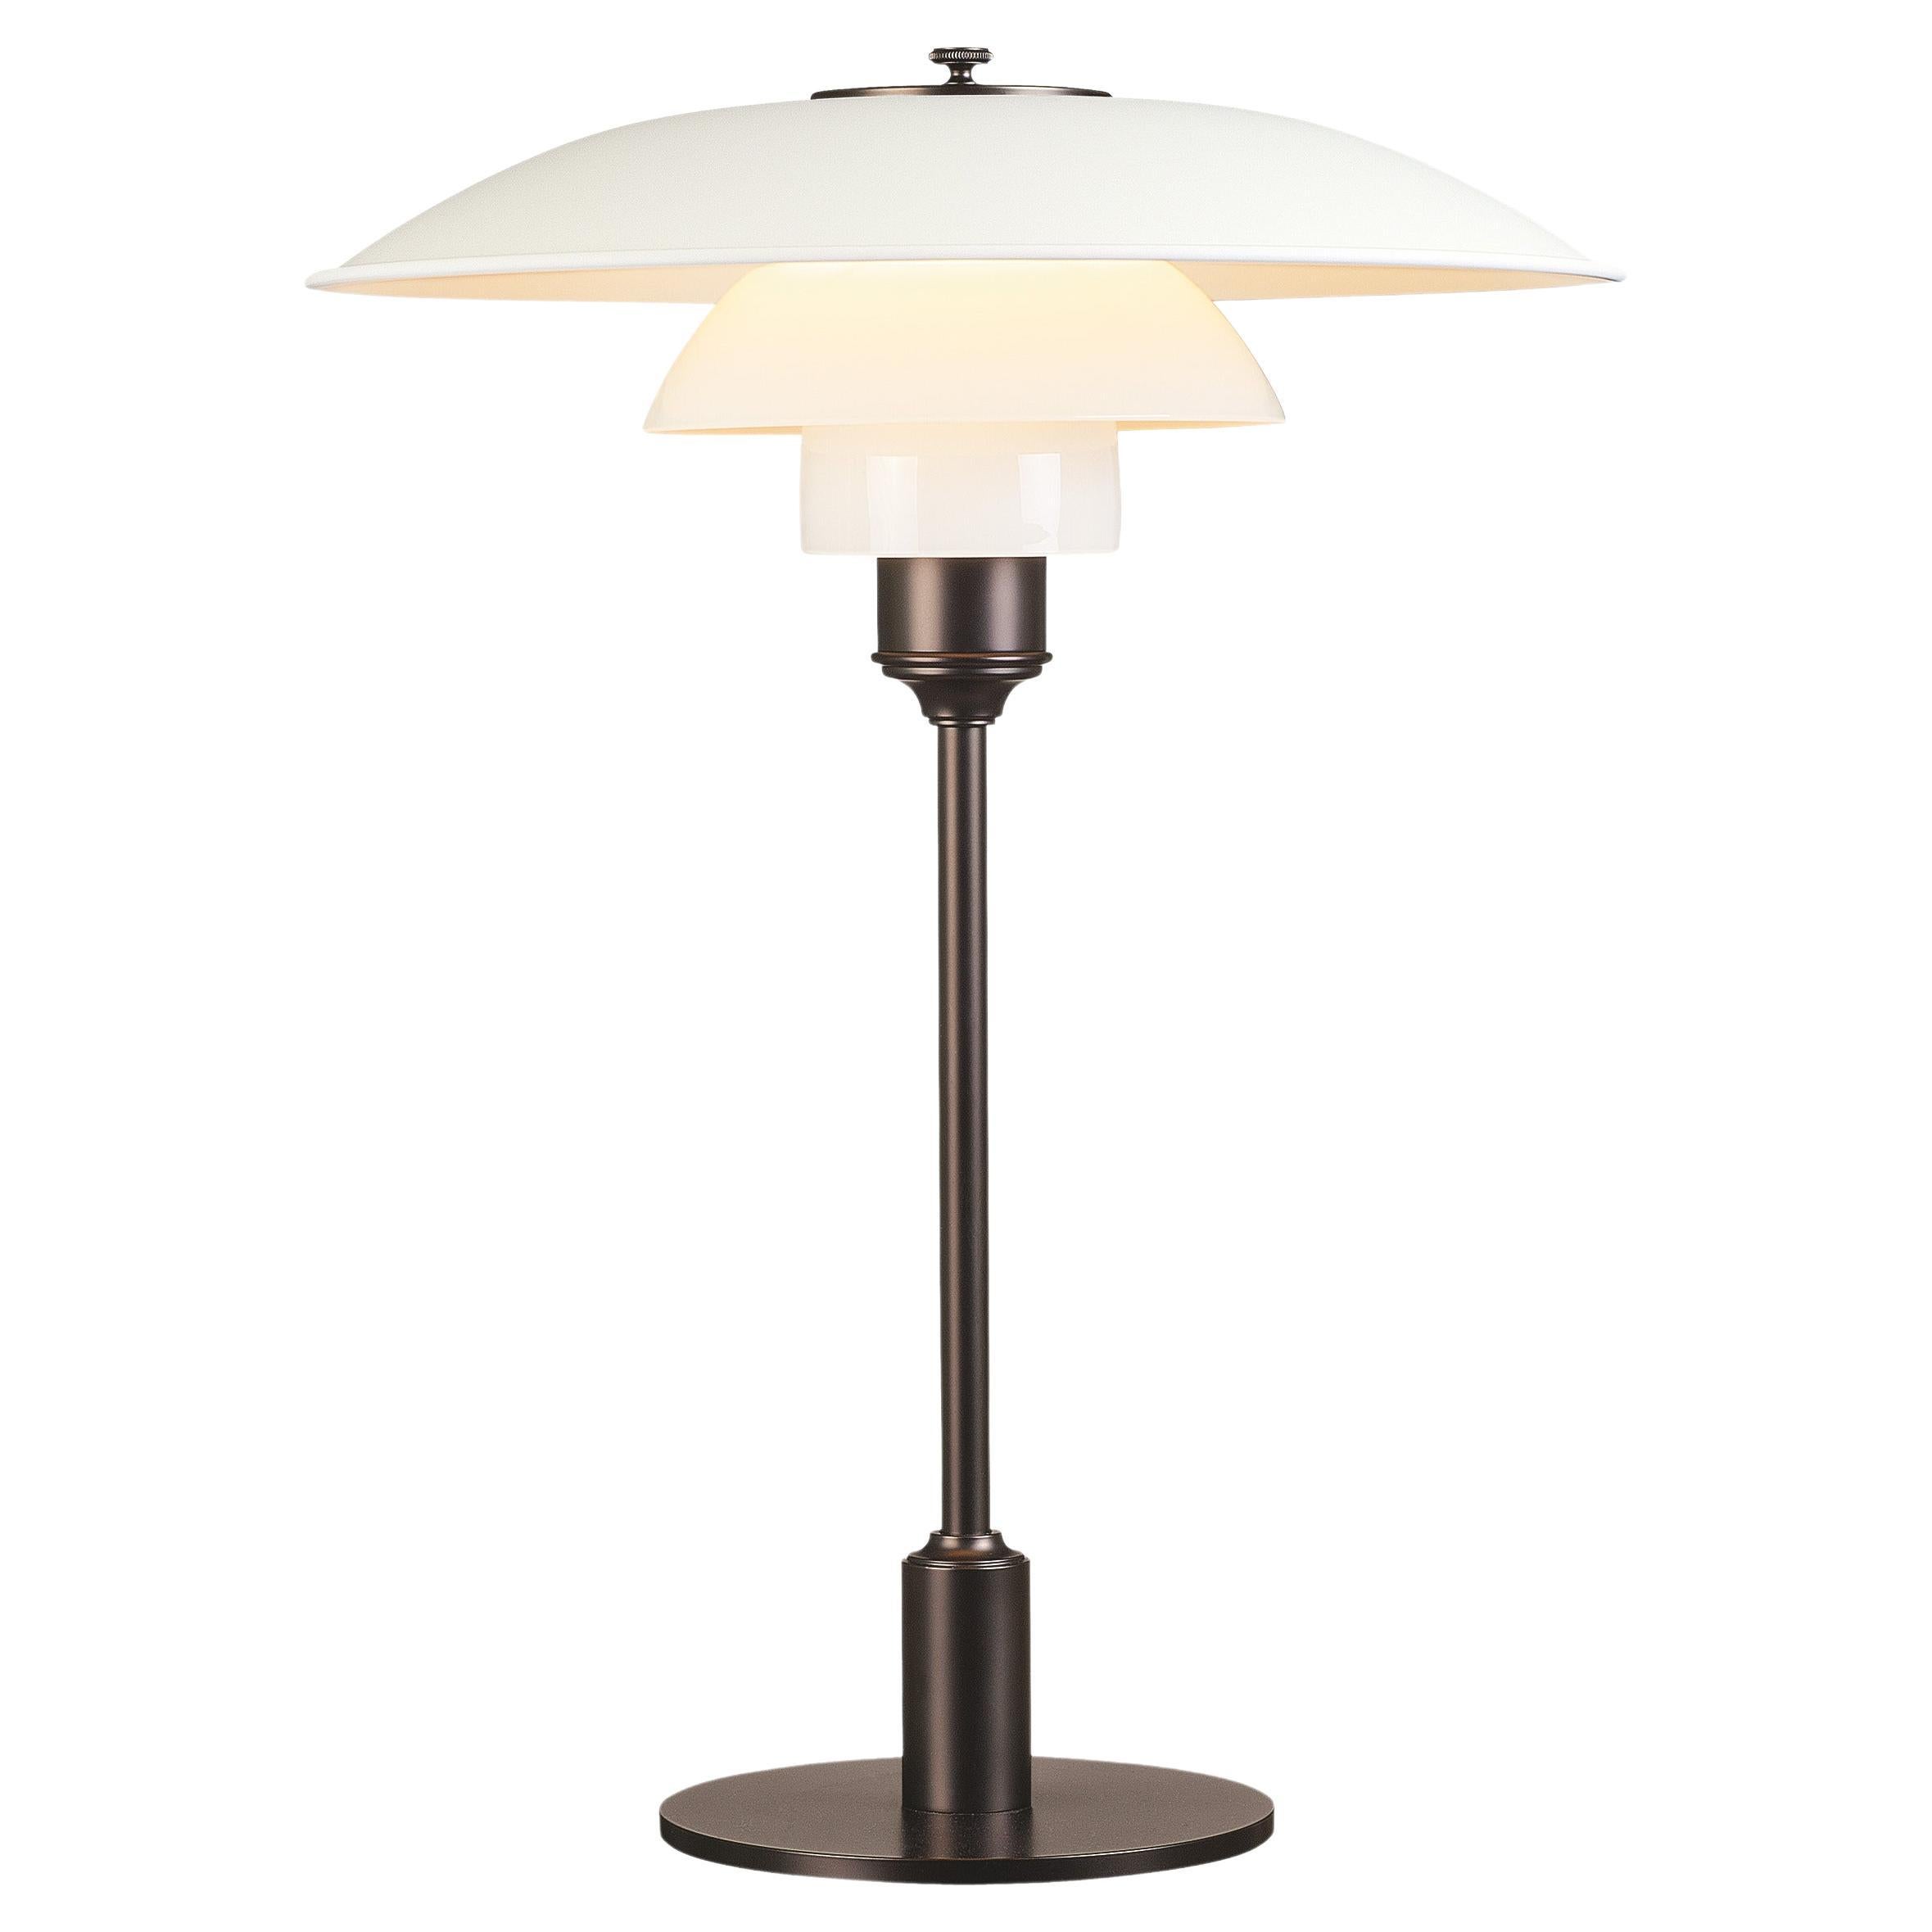 Louis Poulsen PH 3½-2½ Color Table Lamp in White by Poul Henningsen